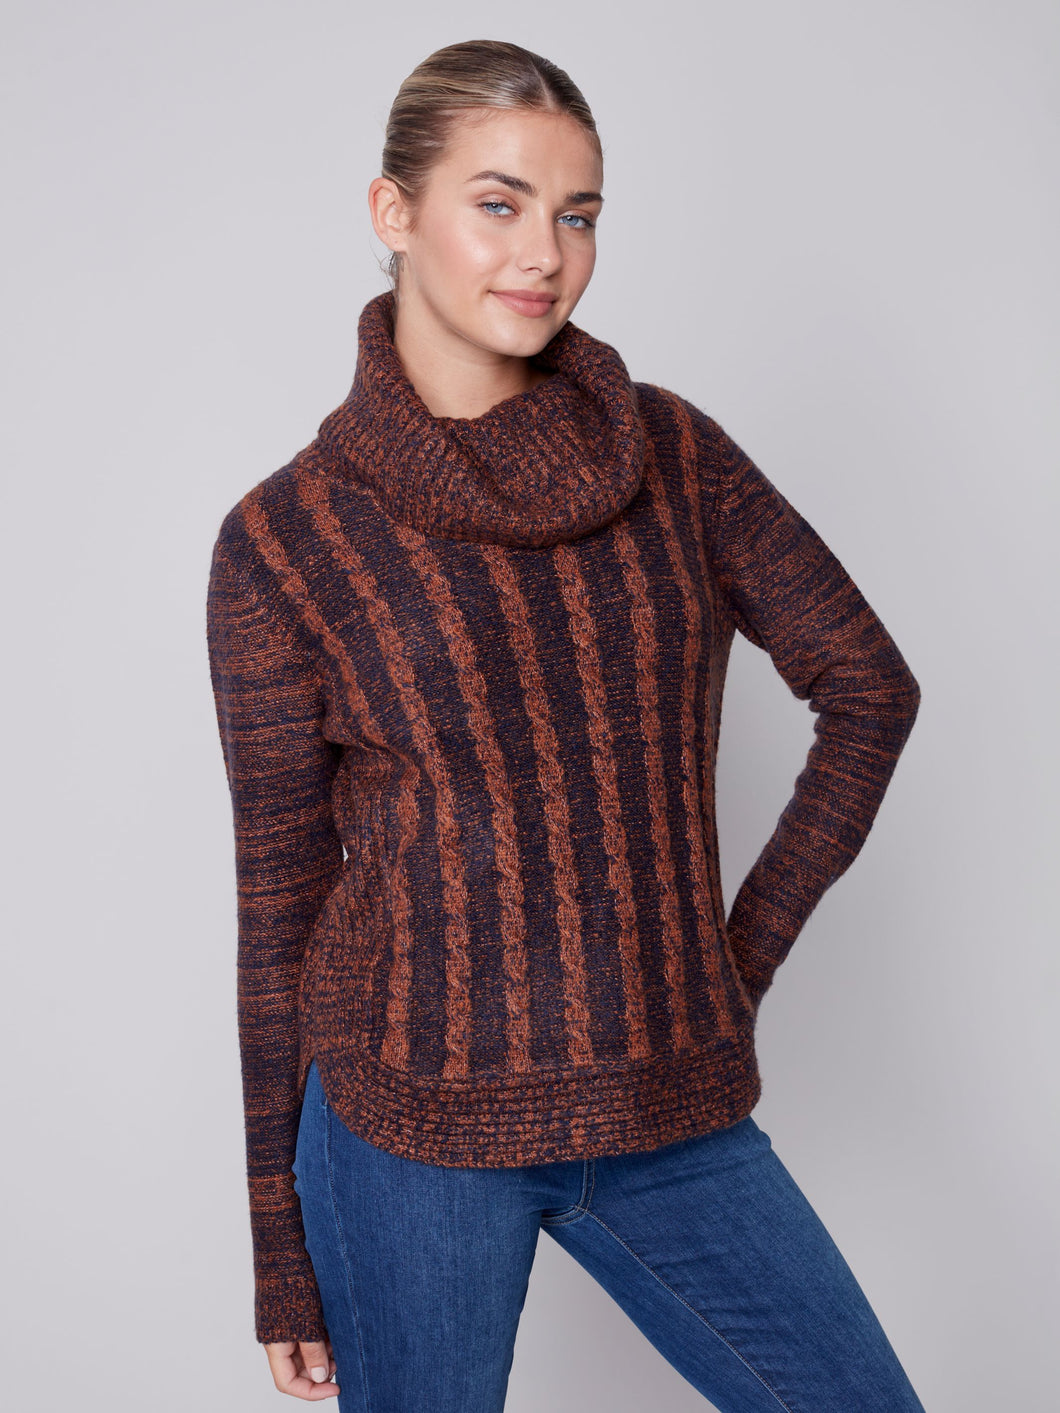 Charlie B Becca Cable Knit Sweater